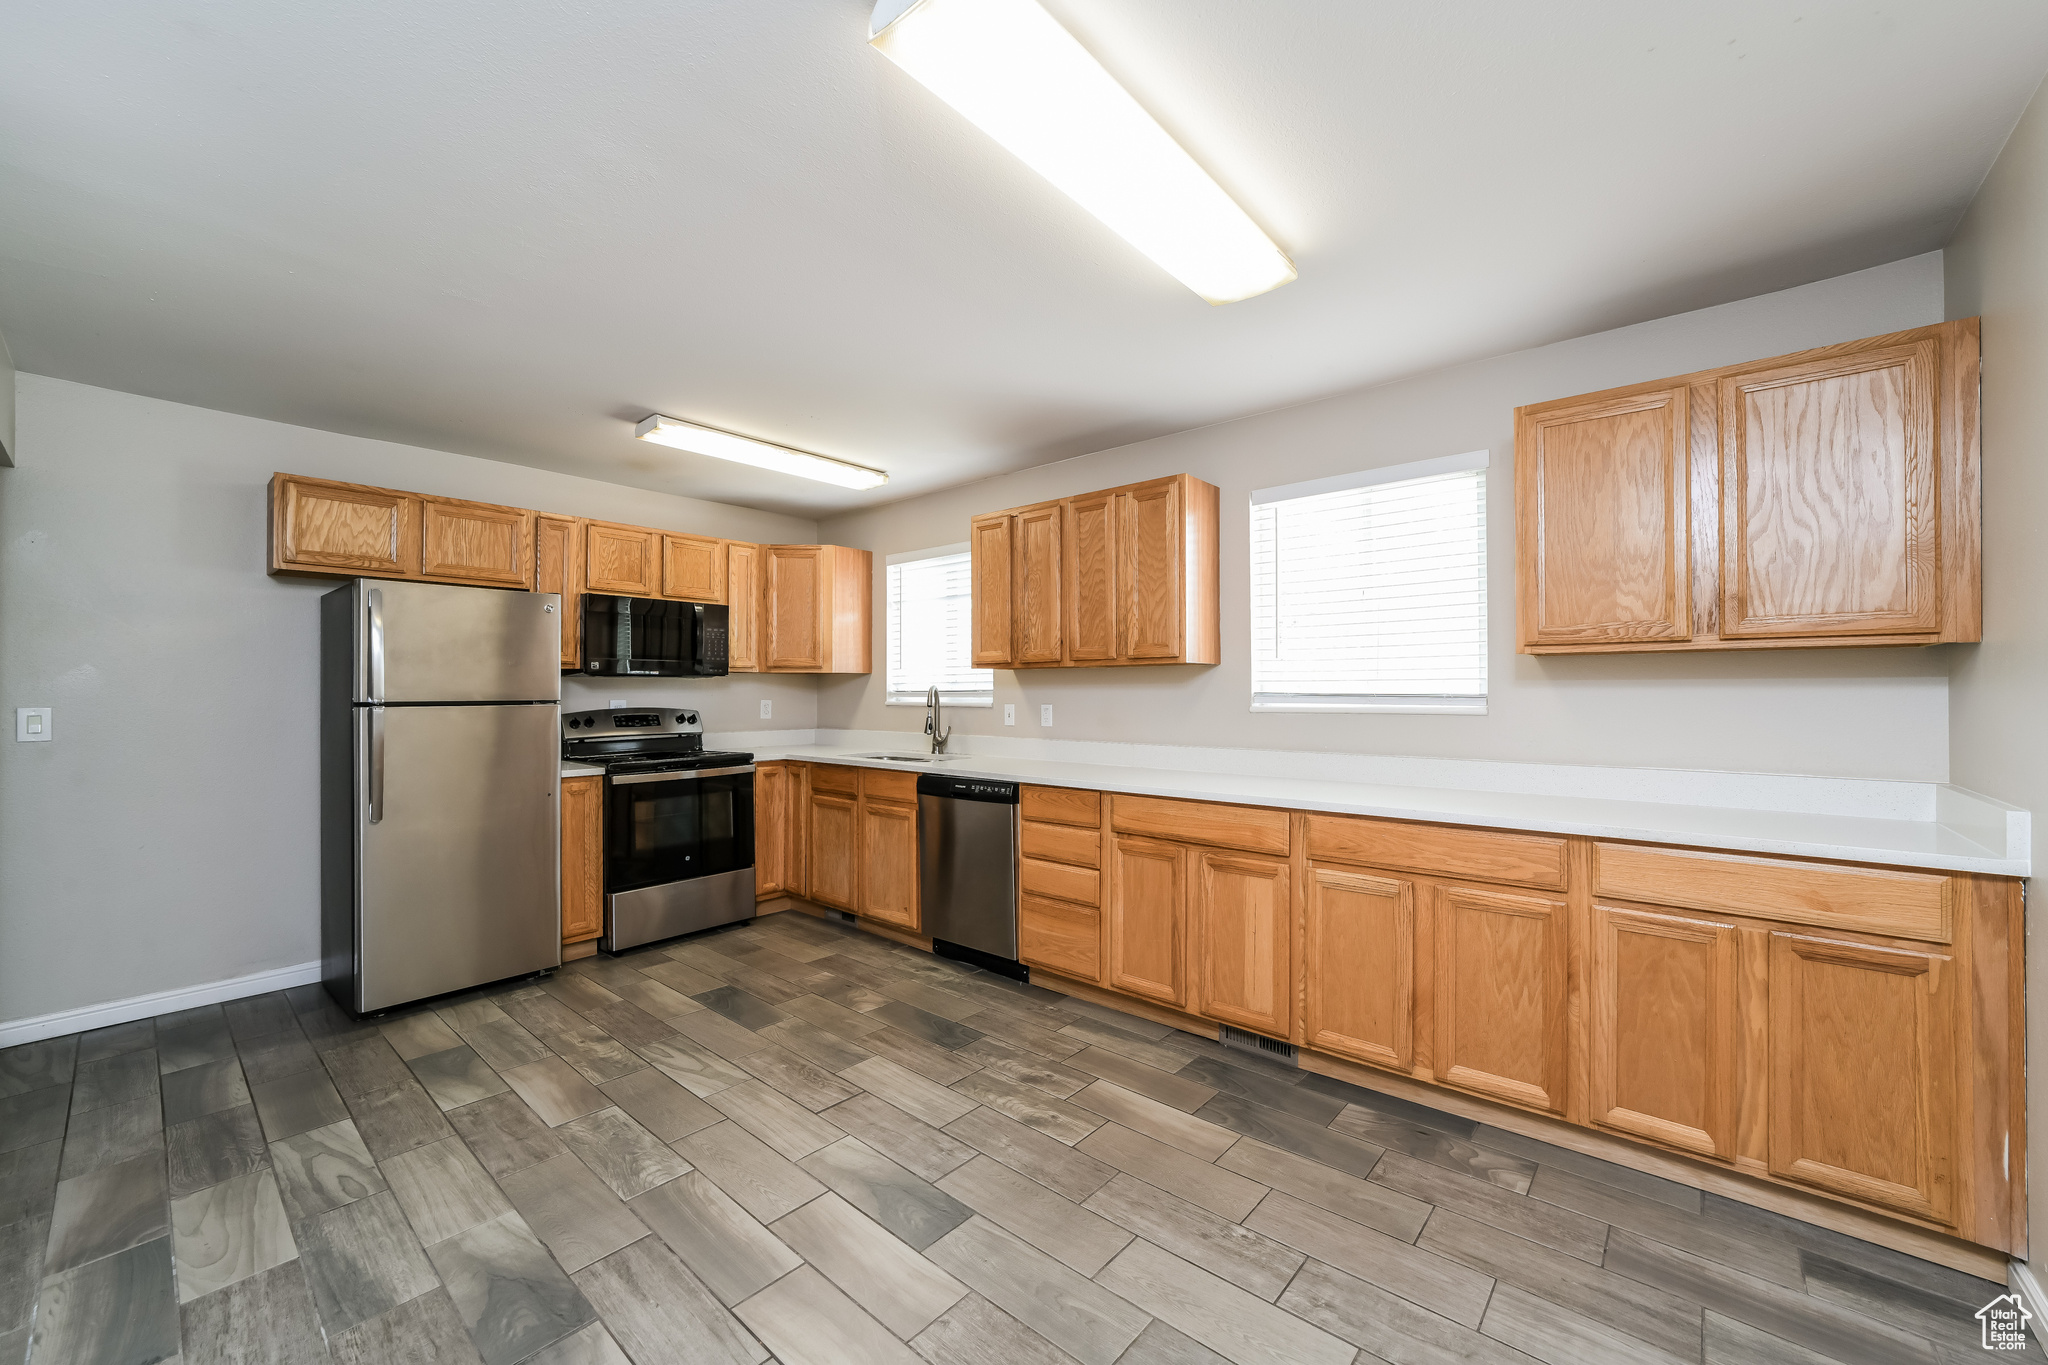 Kitchen featuring stainless steel appliances, hardwood / wood-style floors, and sink